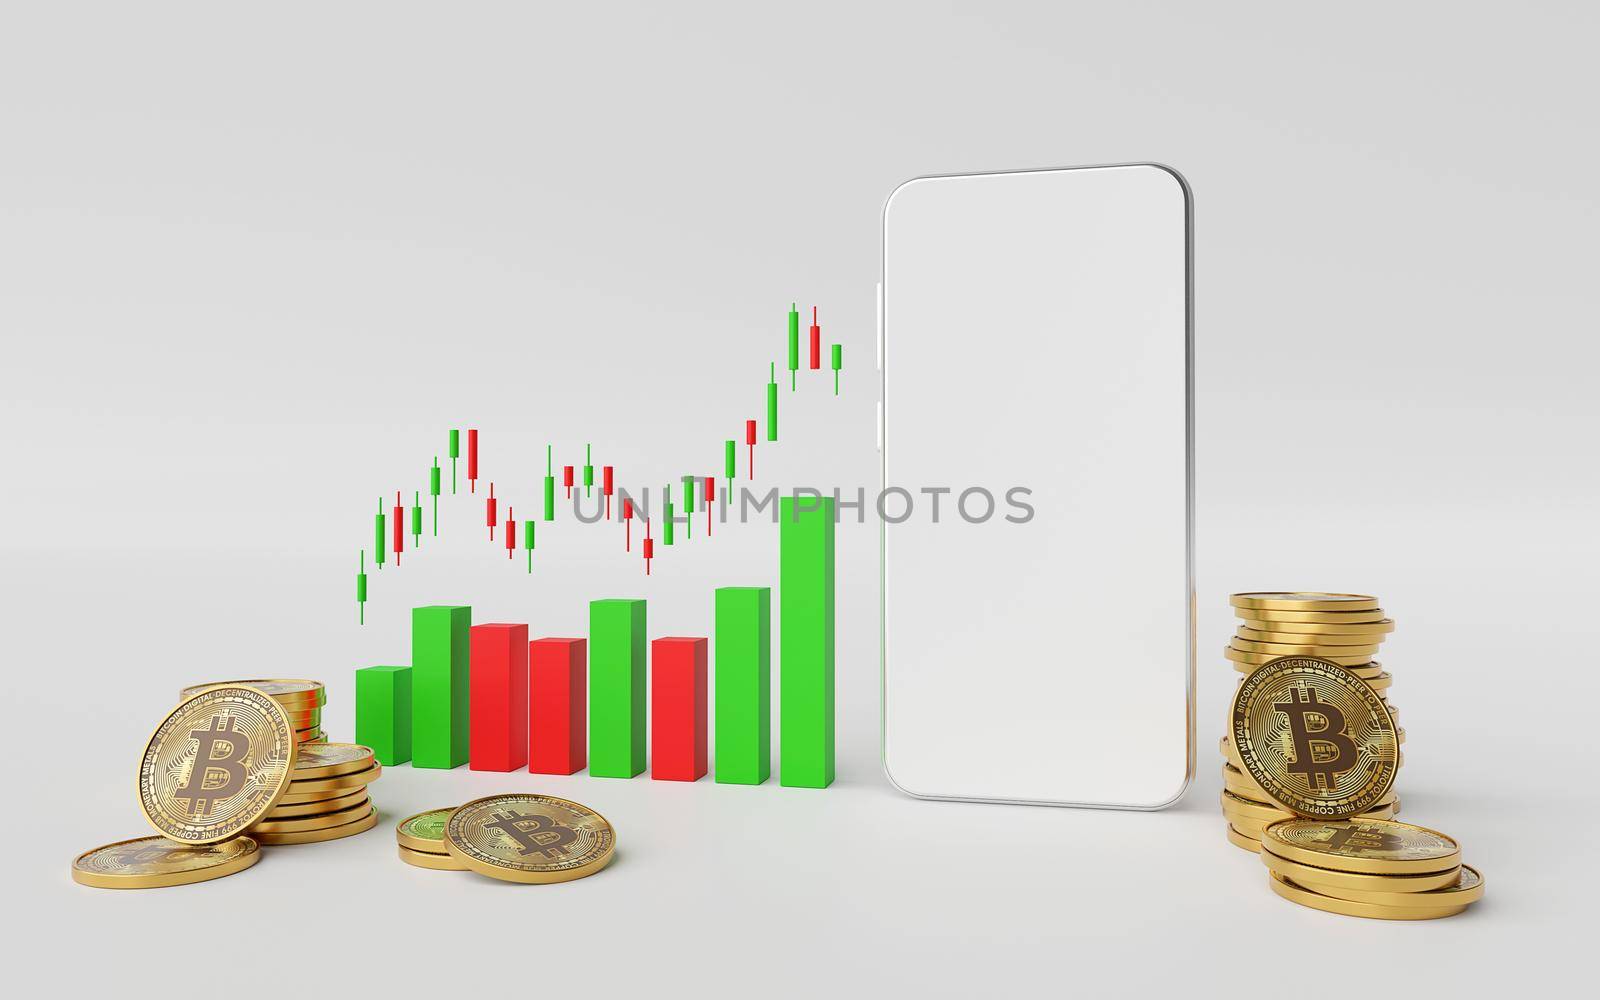 Investment concept, Mockup of smartphone with candle stick graph chart of stock market cryptocurrency trading up, 3d rendering